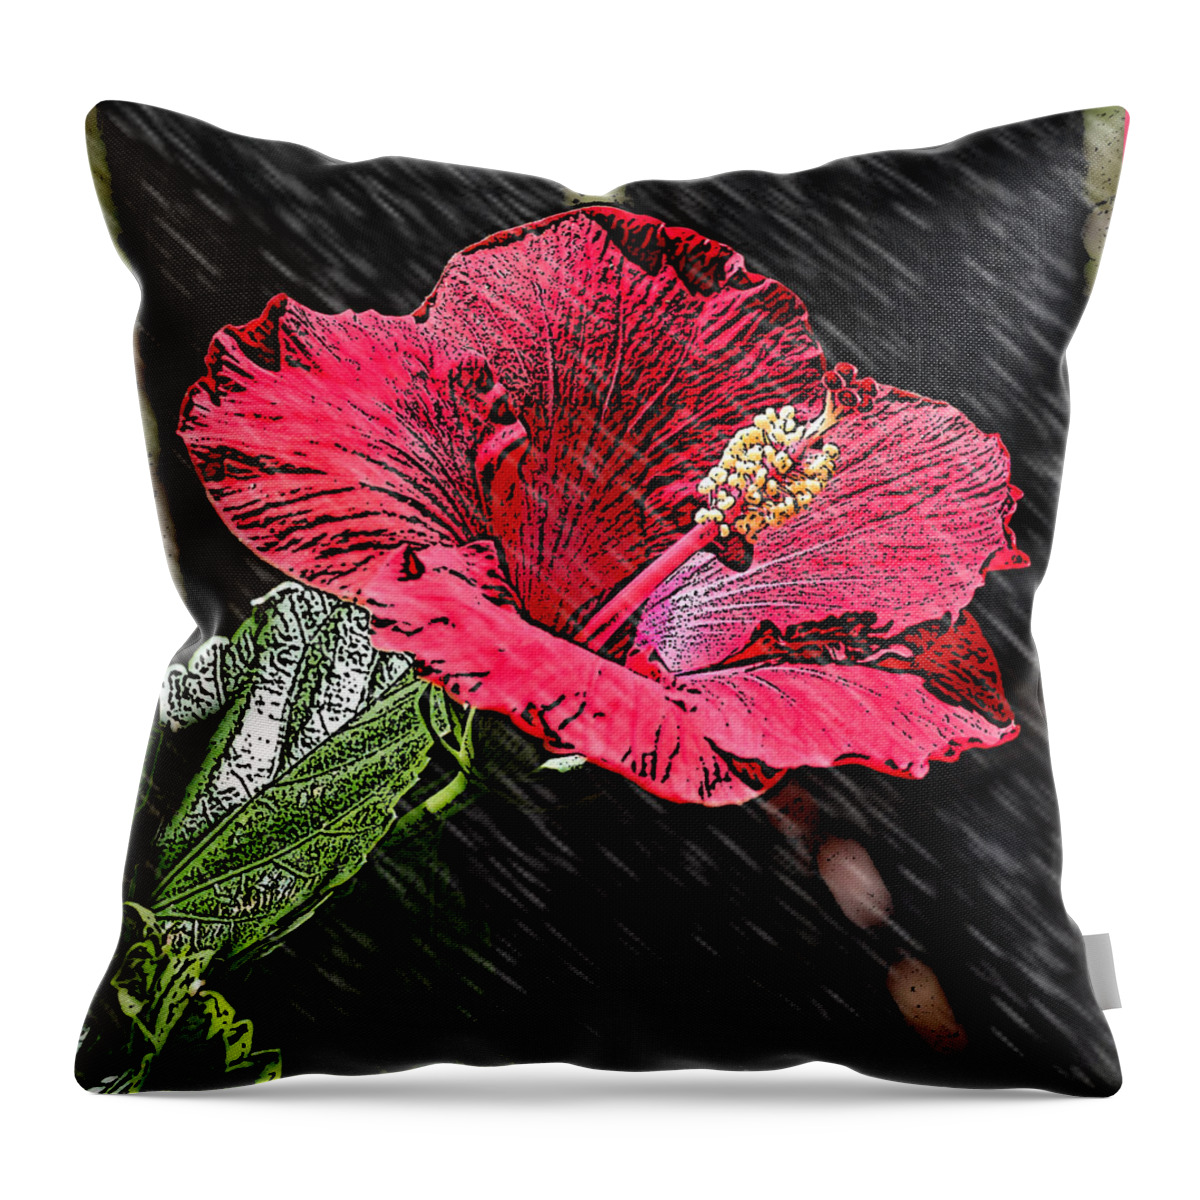 Flowers Throw Pillow featuring the photograph Hibi by Leticia Latocki